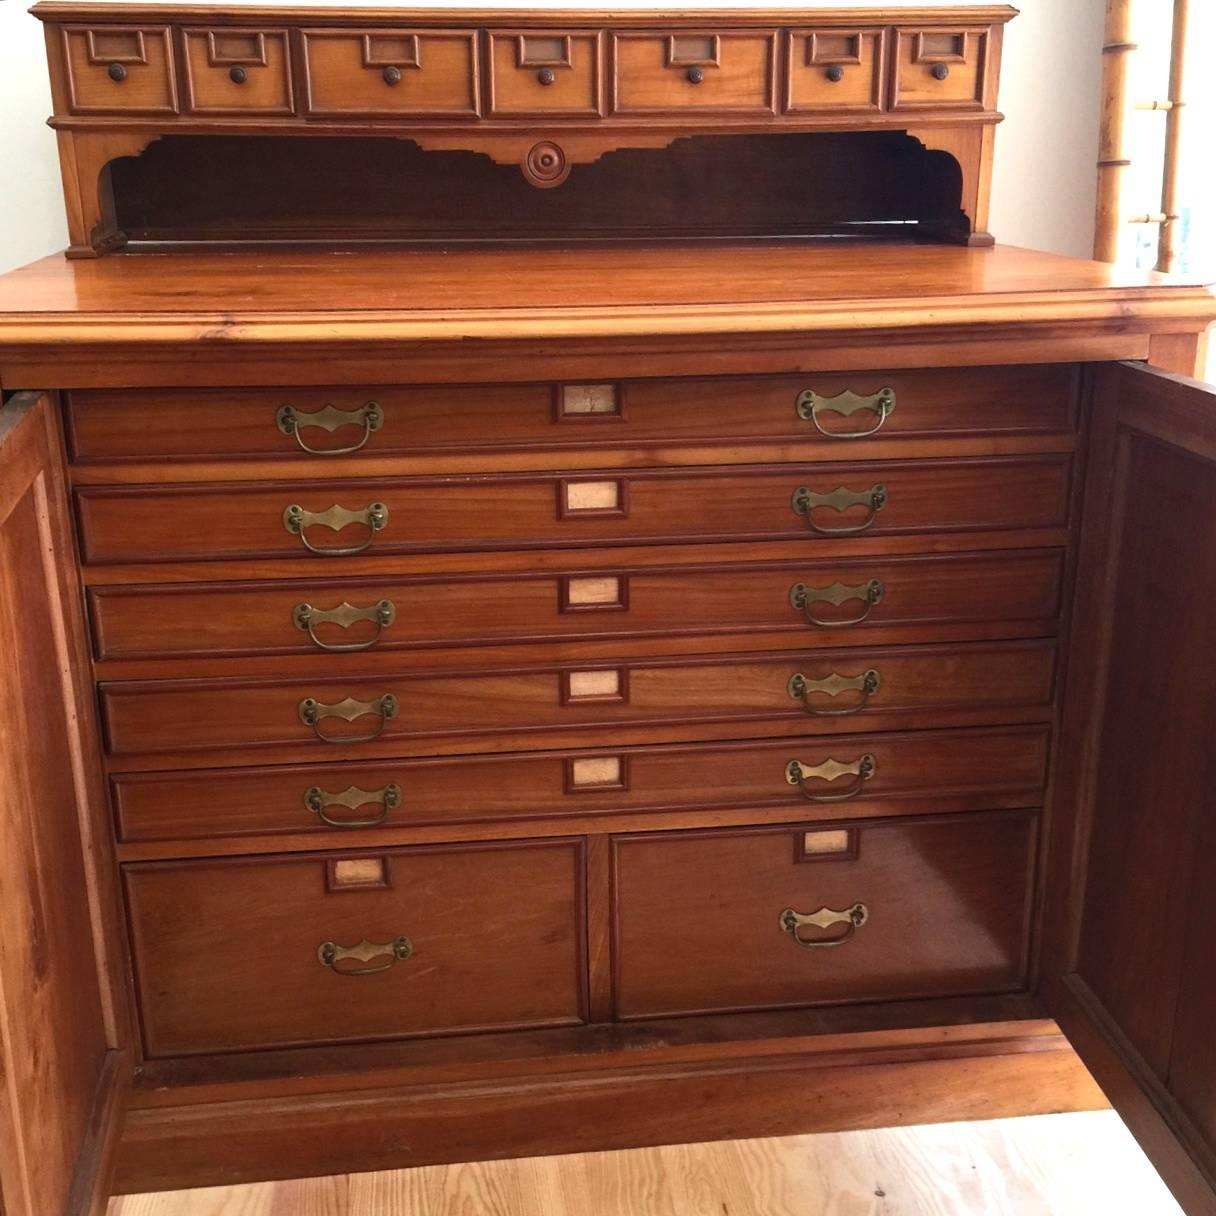 Solid wild cherrywood cabinet for plans or engraving opening by two doors with inside five large drawers for plans and two very deep drawers
On the upper part seven original little drawers,
Solid oak inside, built of poplar drawers
To note a slot